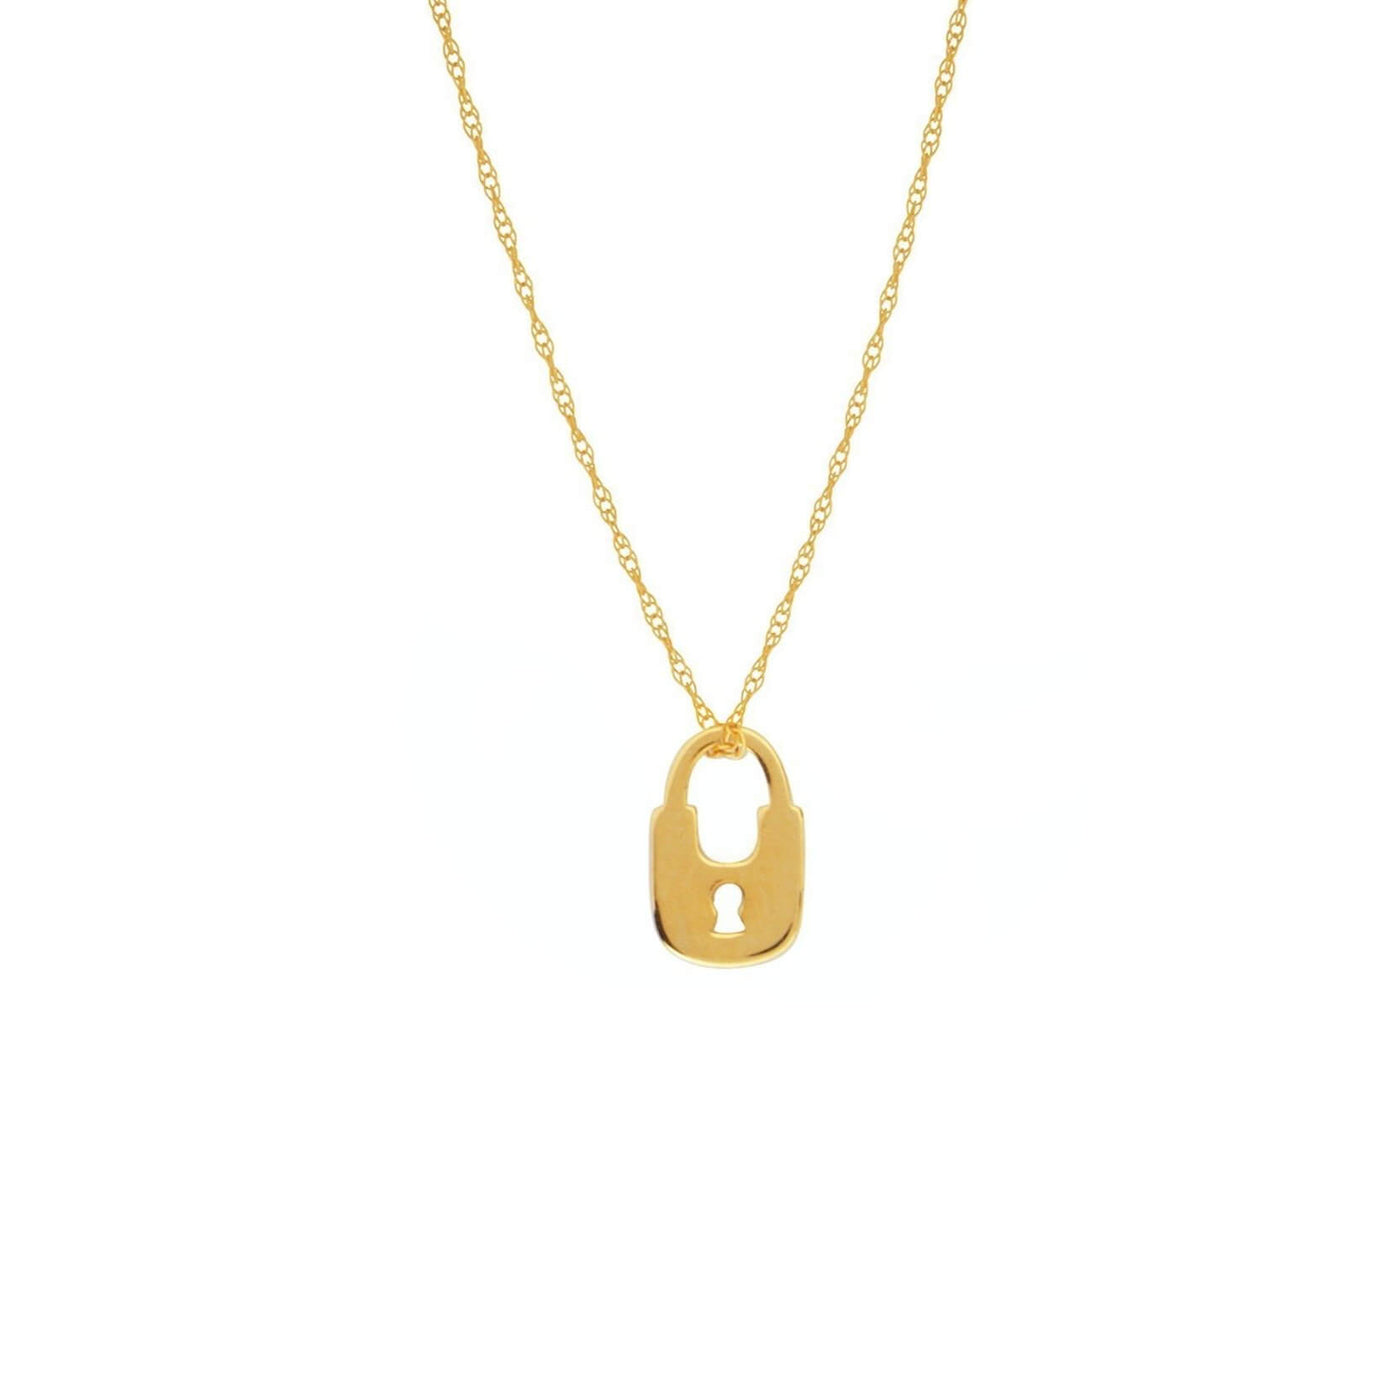 14k Gold Heart Cut Out Lock Pendant with 18'' Chain 